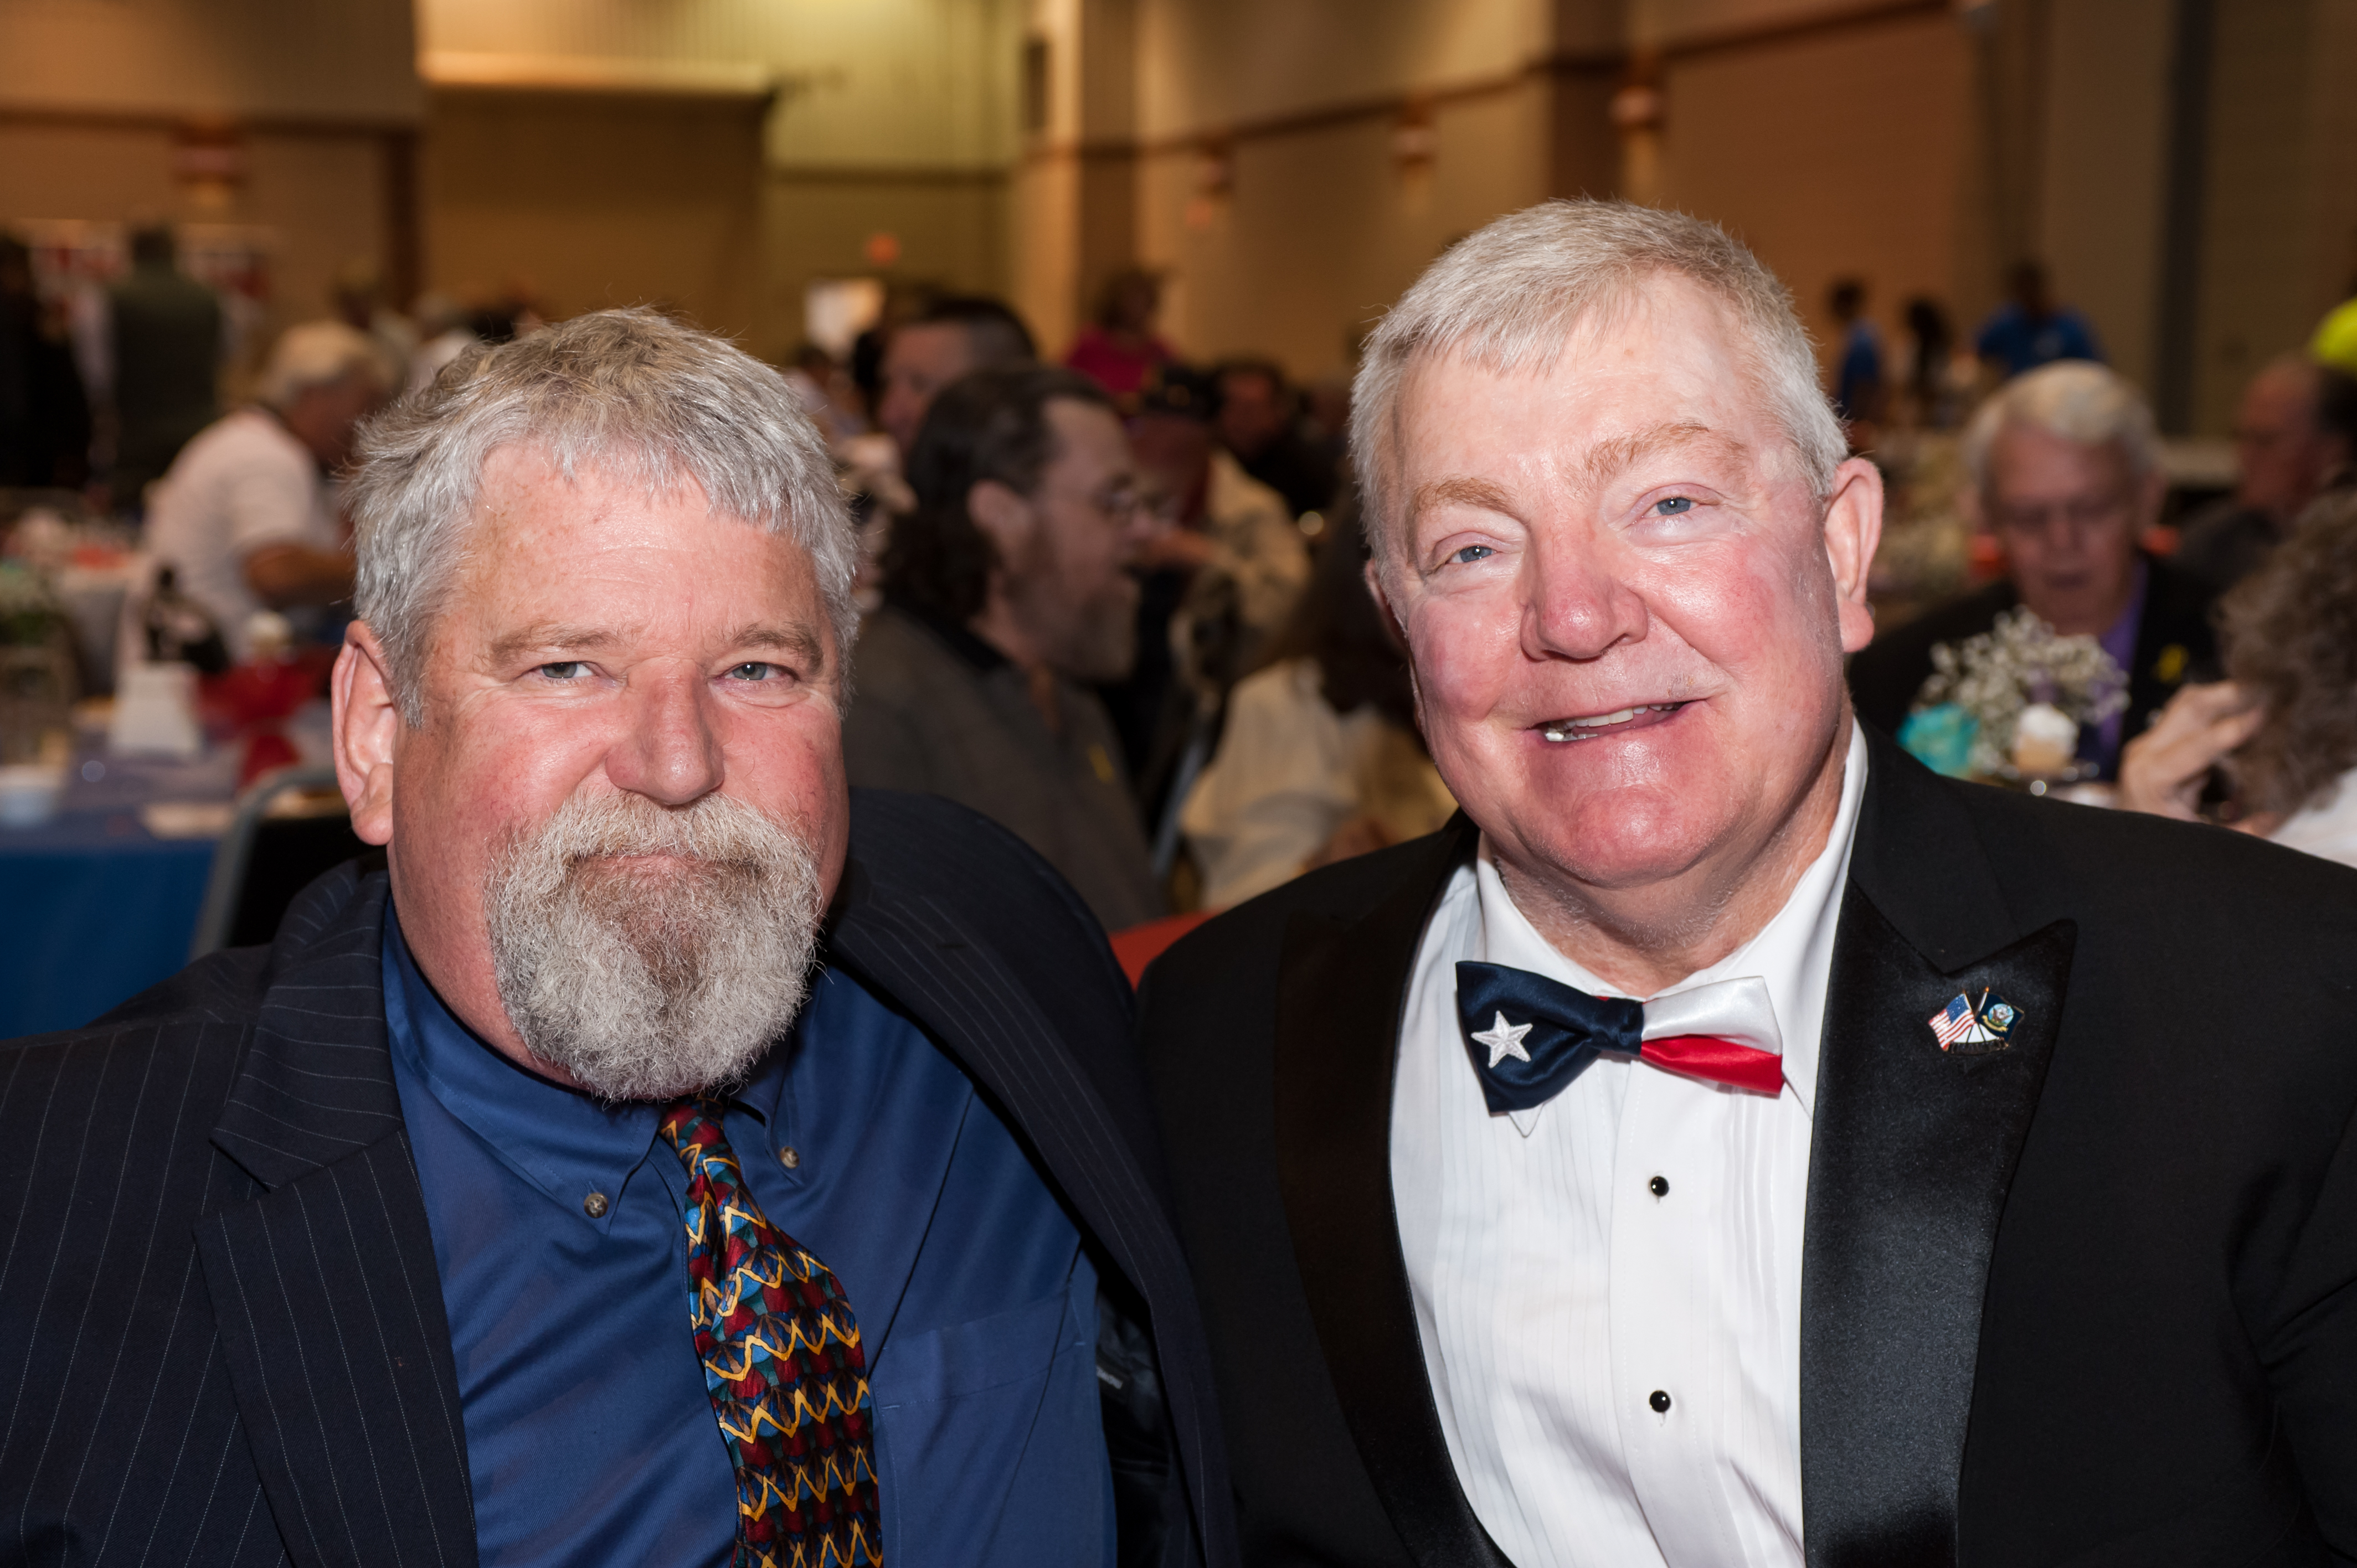 Shaie Williams for AGN Media. Robert Smith and John Barnes Armed Forces Day Banquet  in Amarillo, TX Held at the Amarillo Civic Center on May 21, 2016.